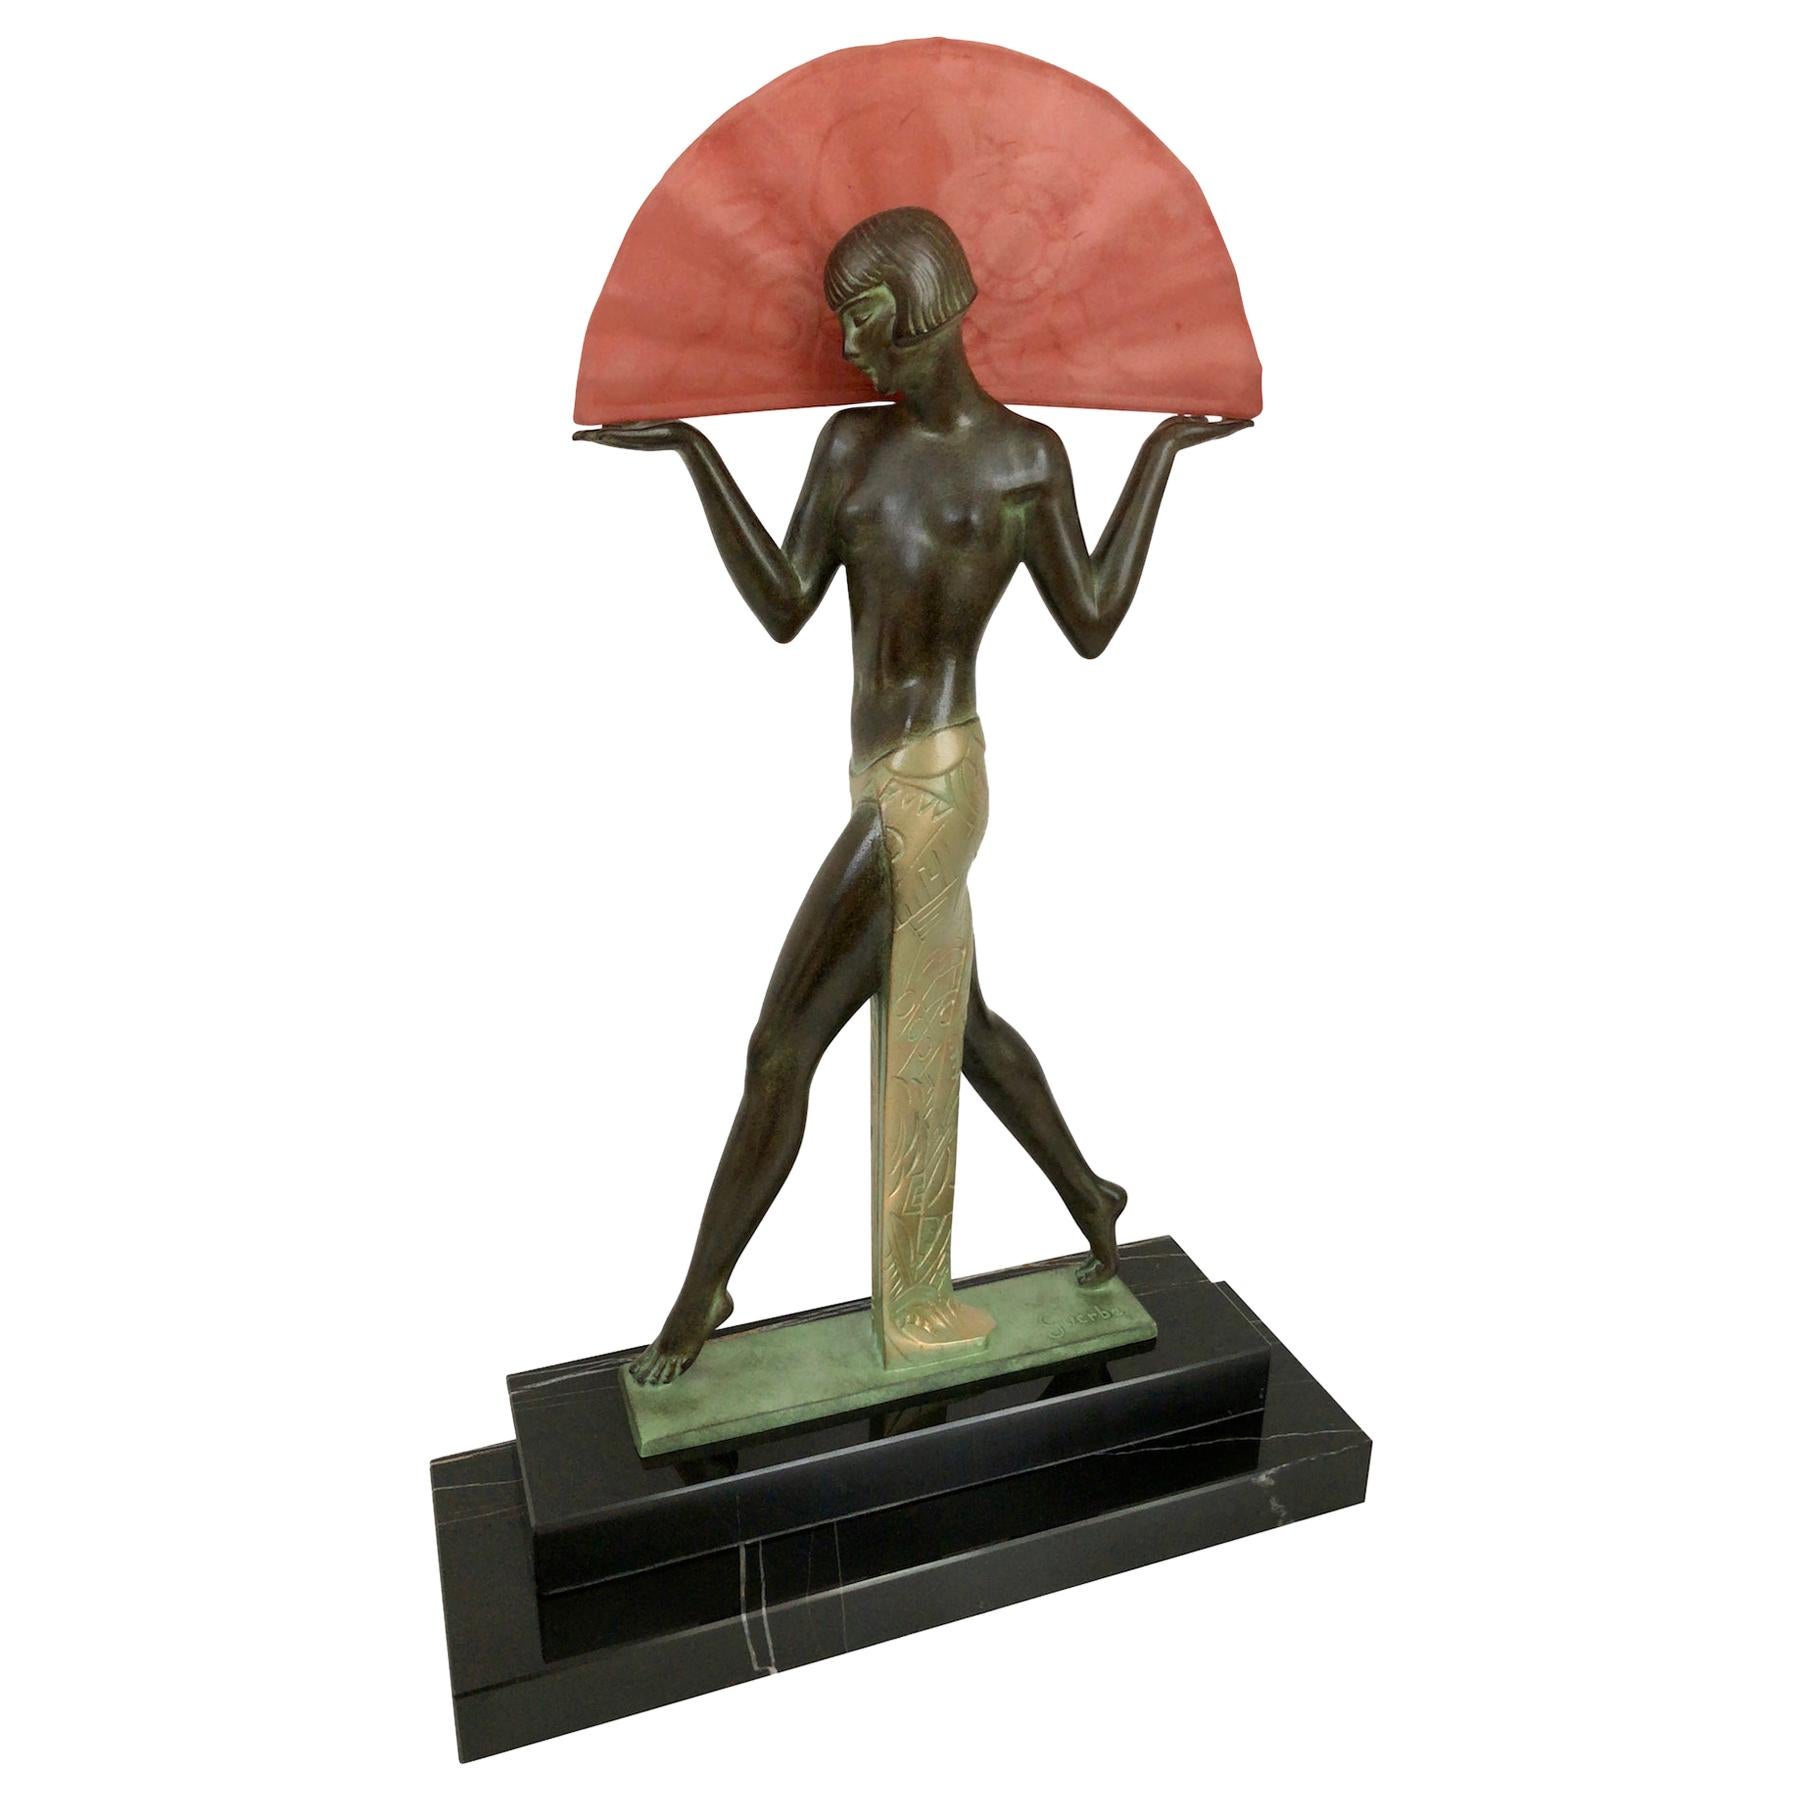 Espana Sculpture Spanish Dancer Lamp by Raymonde Guerbe for Max Le Verrier